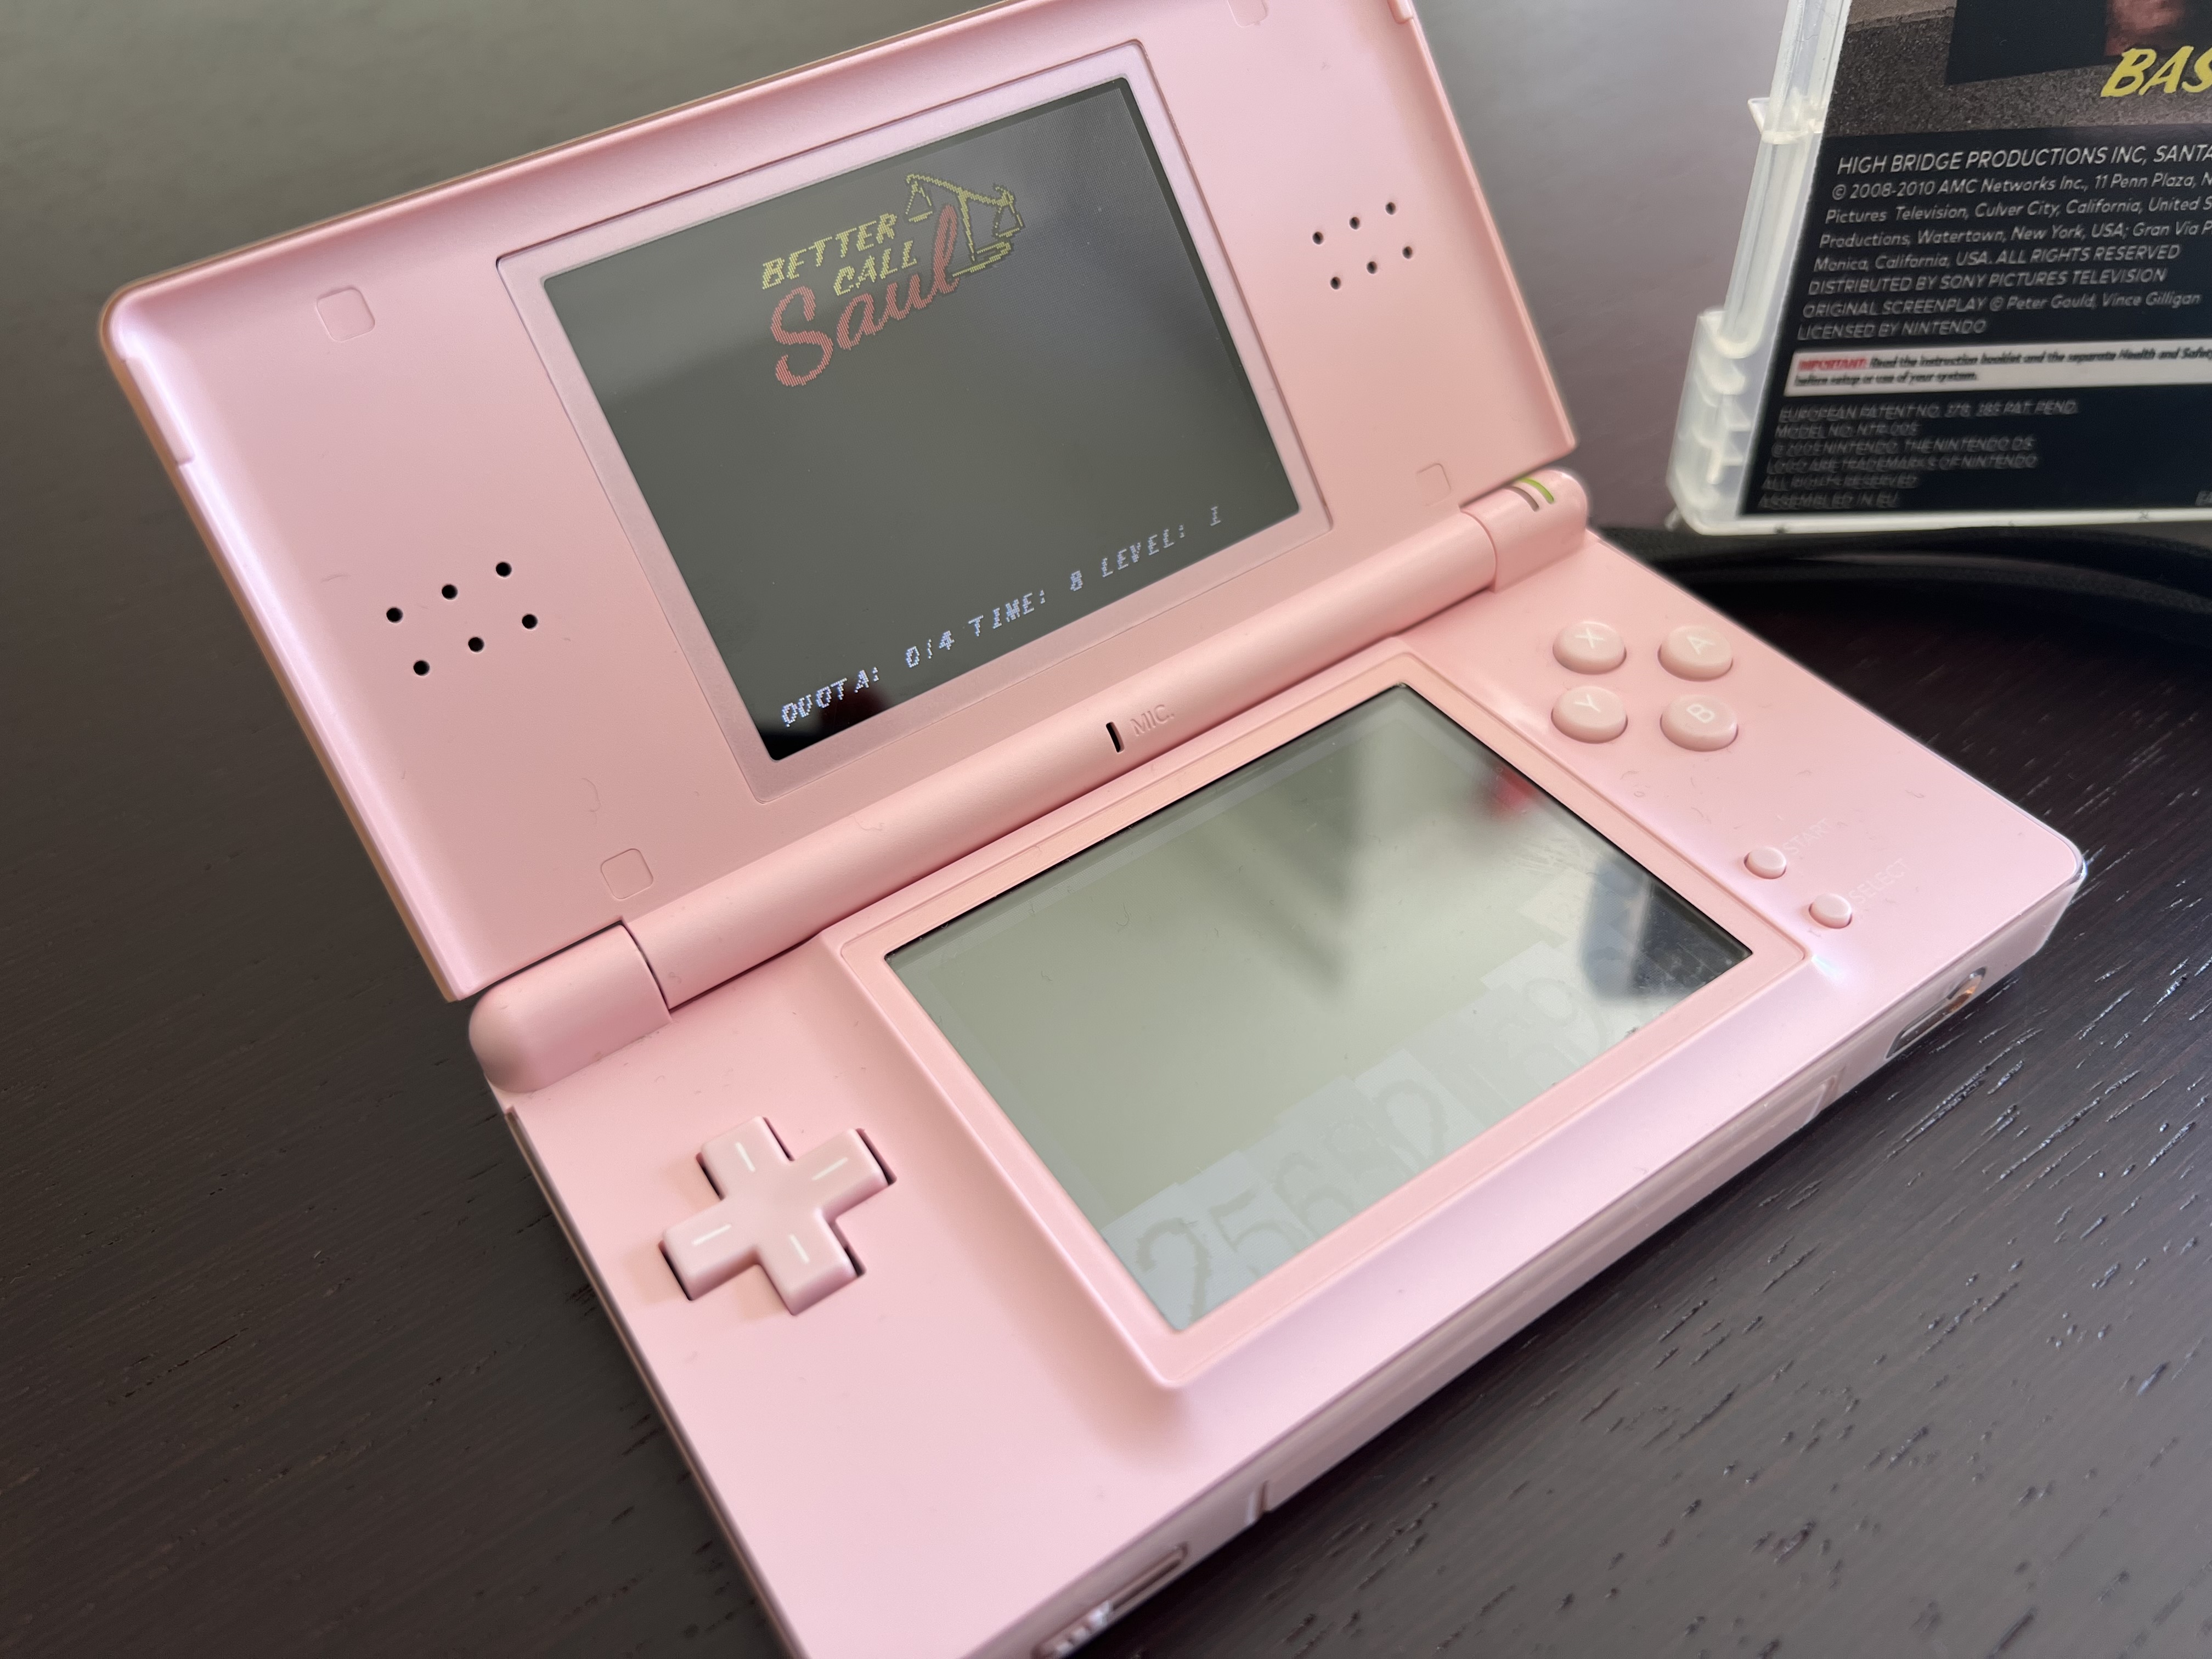 Close-up of gameplay on the DS screen